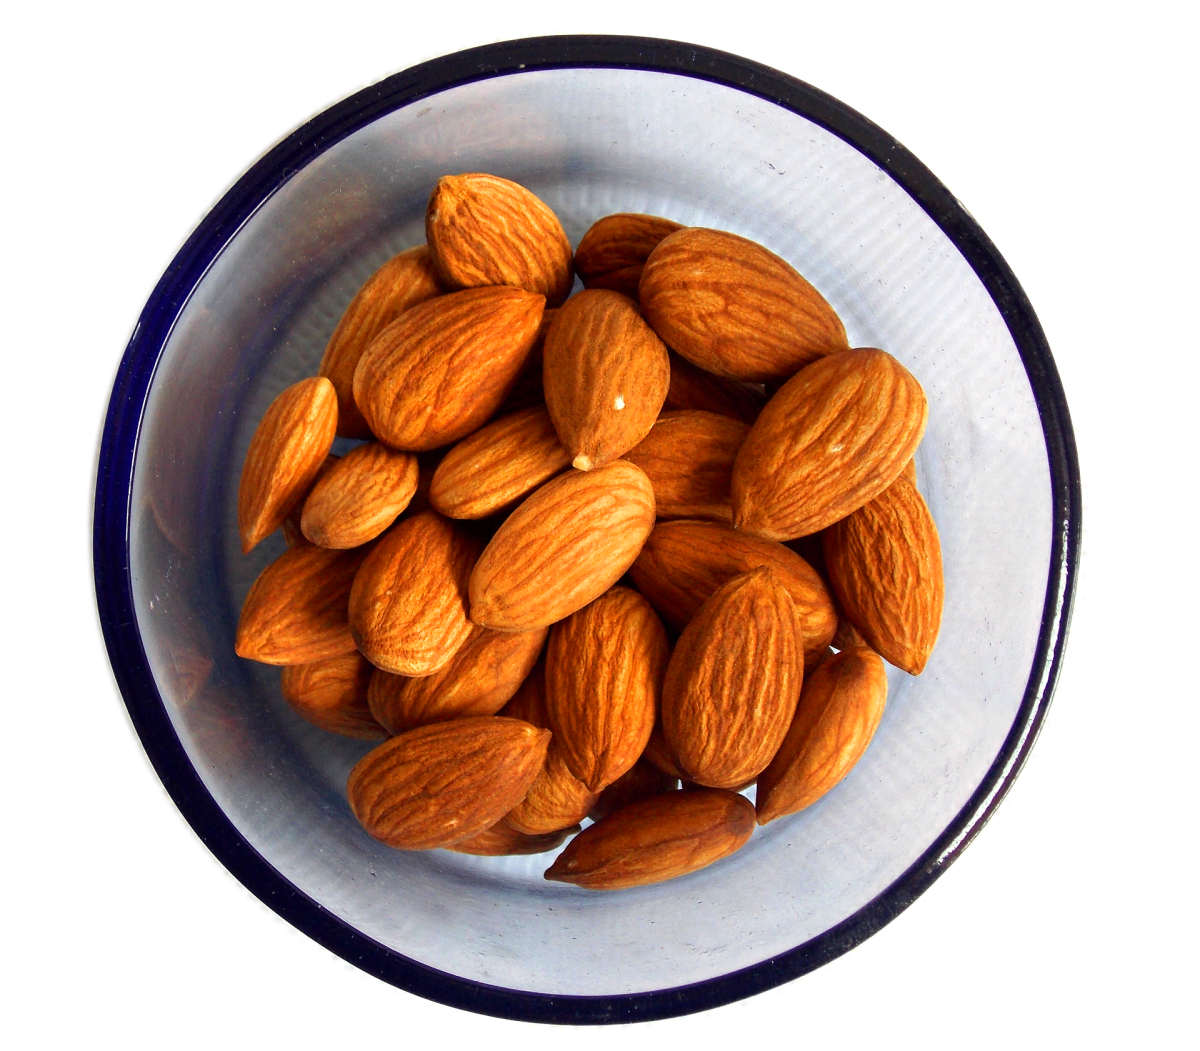 A handful of almonds before bed is not only really good for you, but it'll help keep the hunger pains away until morning.